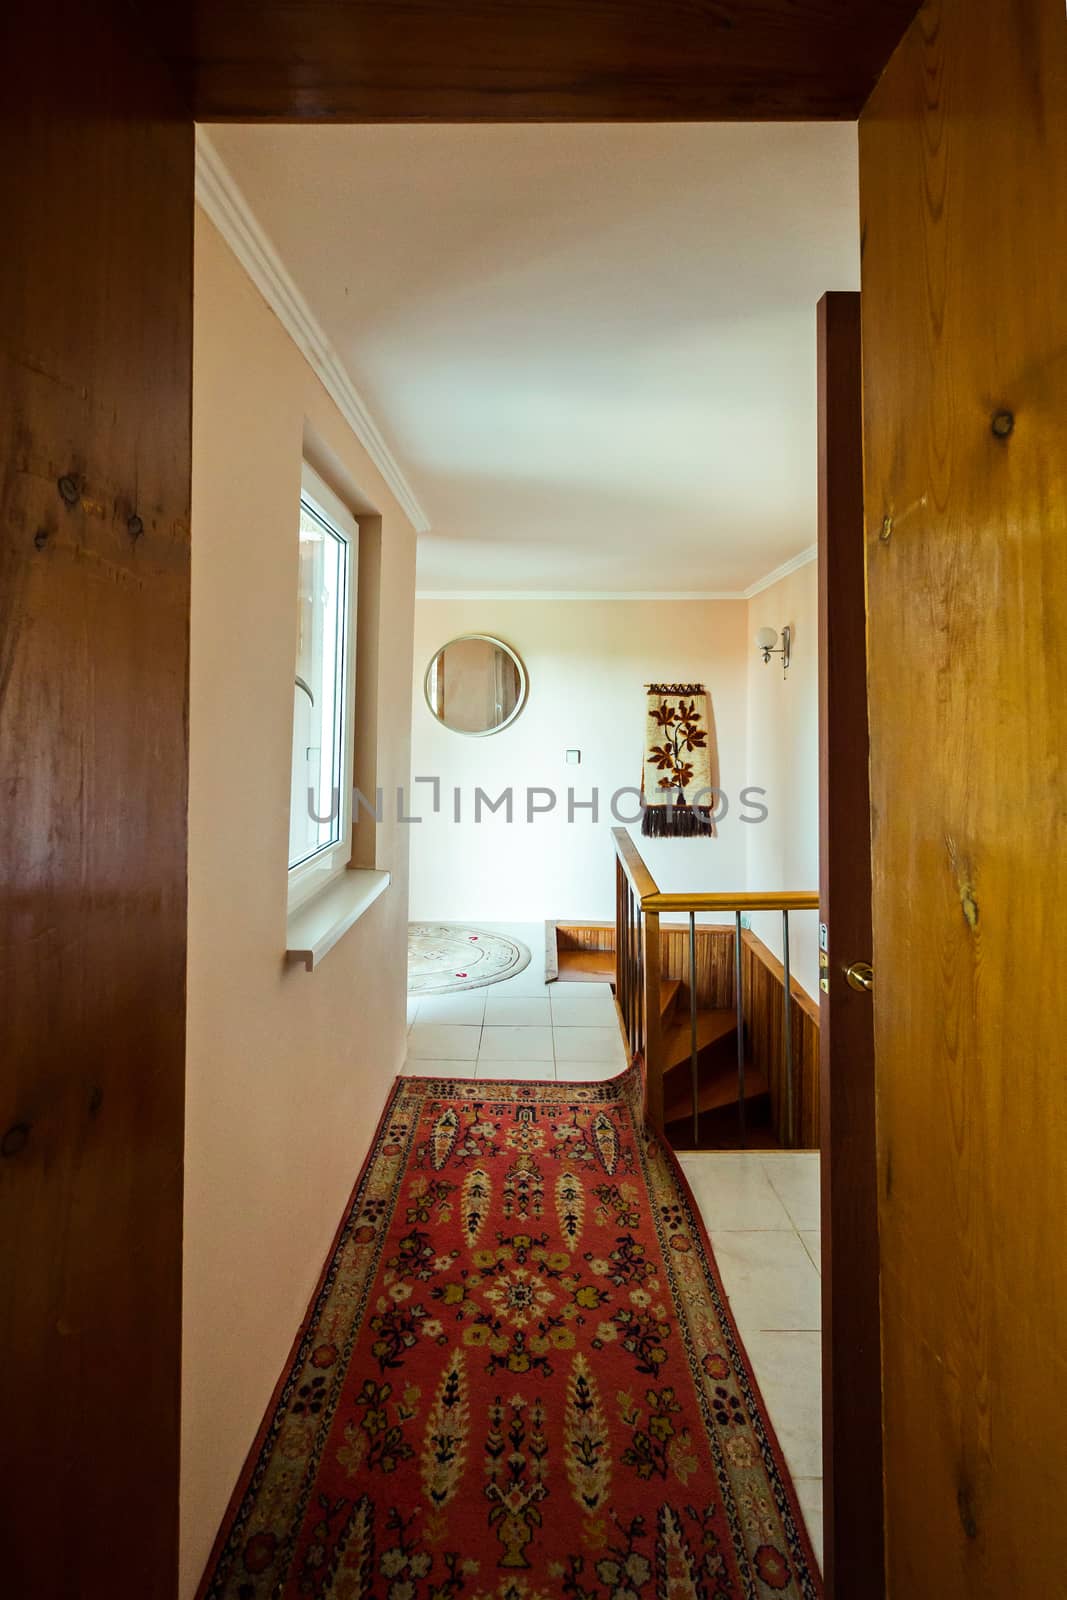 A small corridor in the room with a track on the floor leading to the steps along which you can go down to the floor below. by Adamchuk